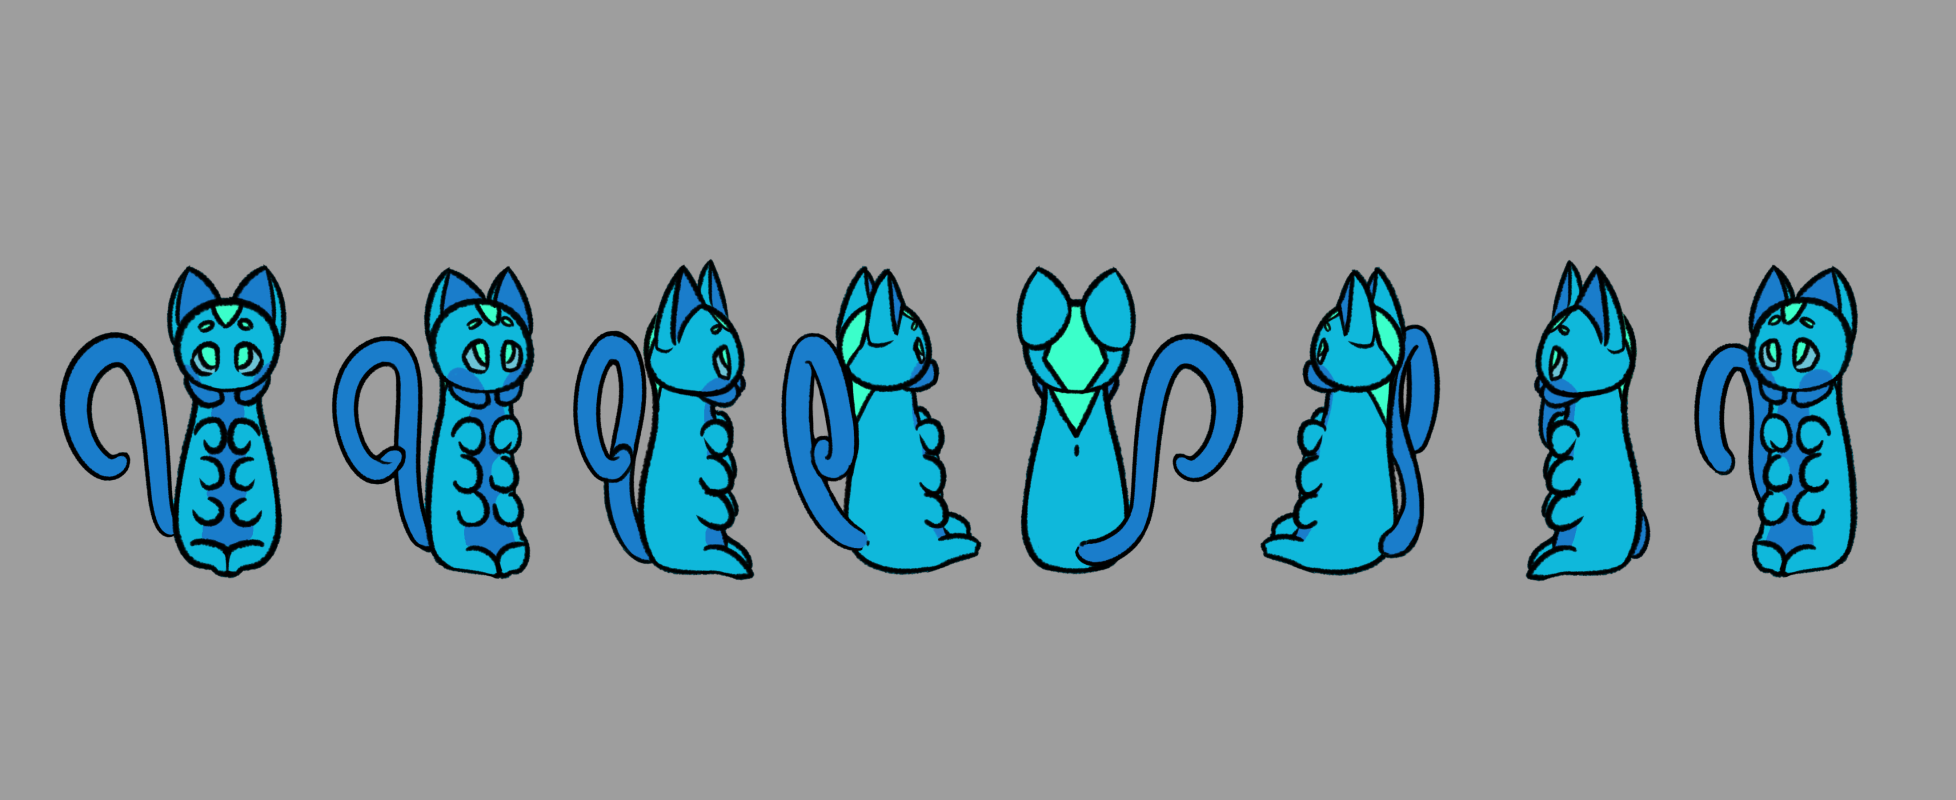 A character design turnaround of a cat and caterpillar hybrid, which looks like a small blue cat with 8 legs and caterpillar mandibles.